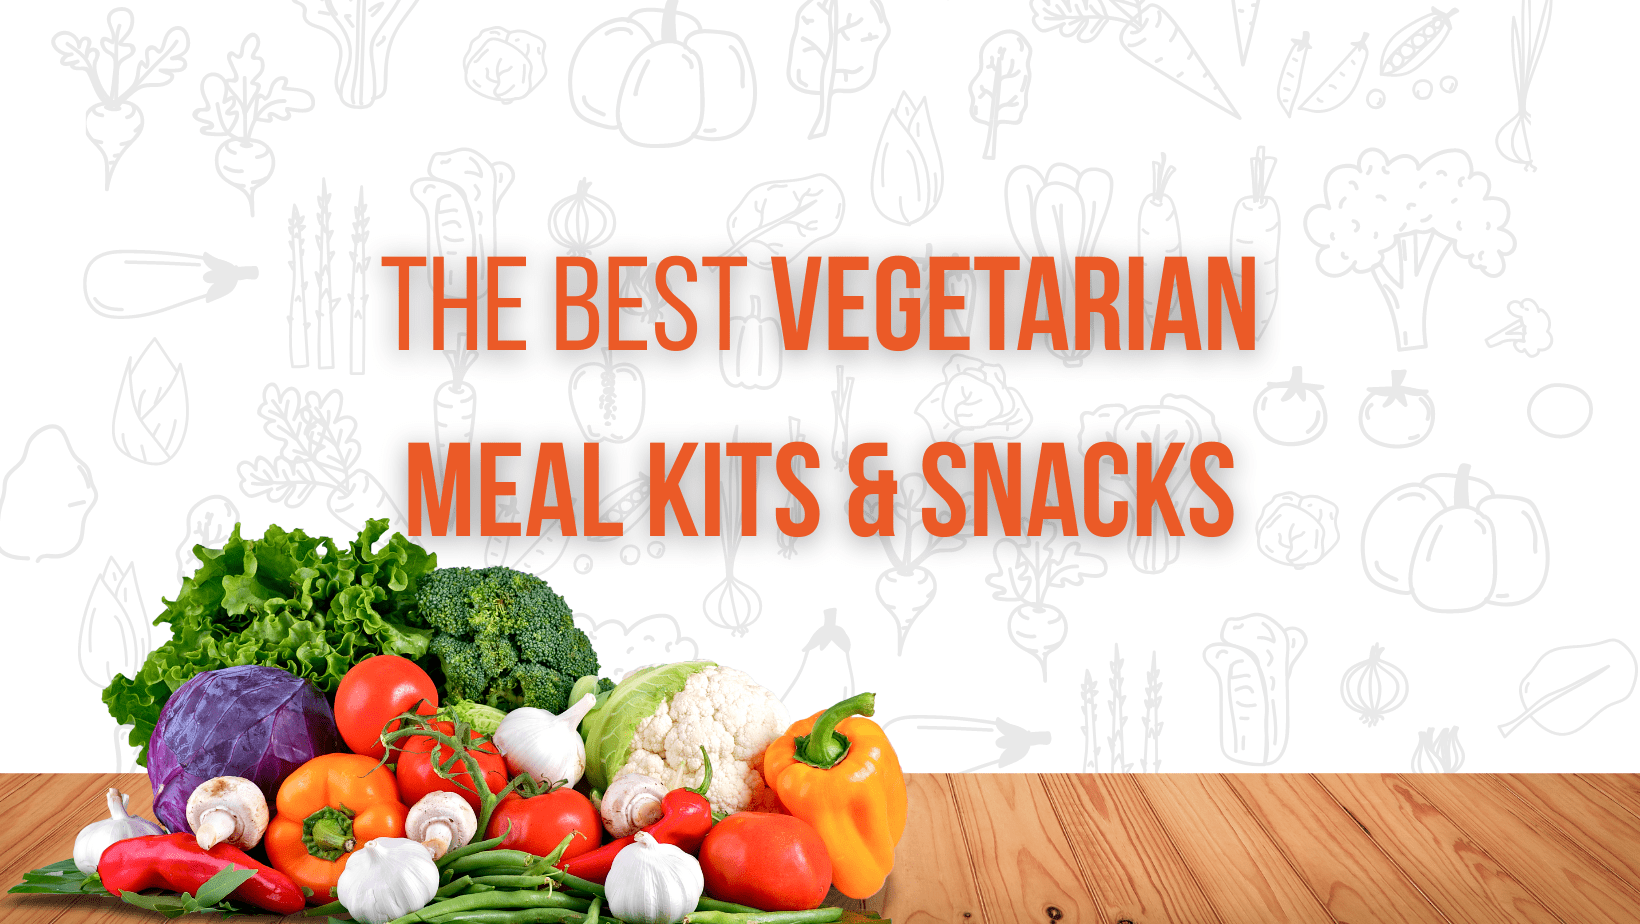 The best meal kit delivery services for 2024